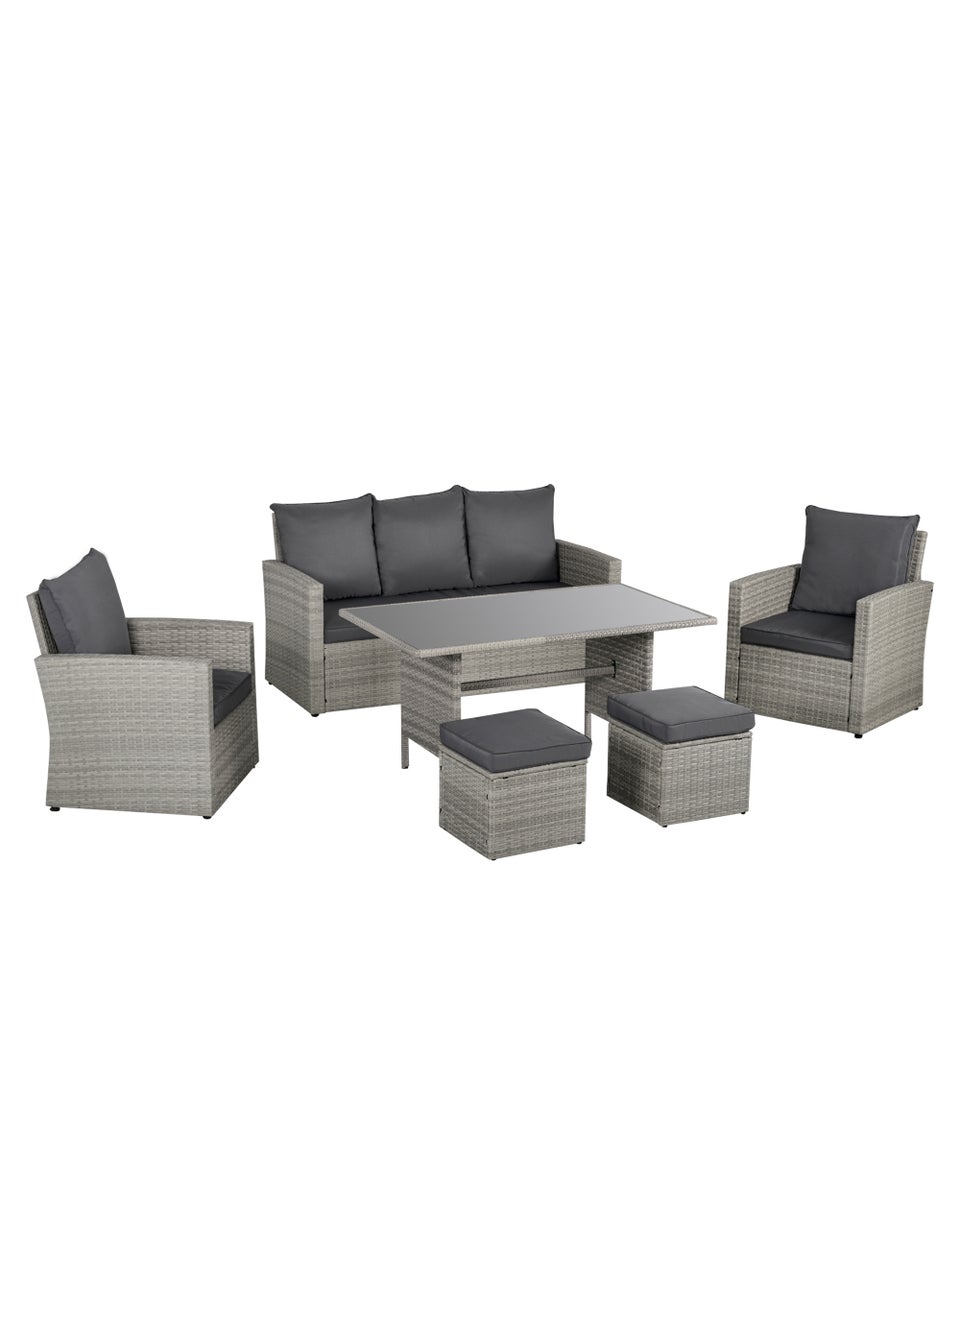 Outsunny 6 Piece Rattan Wicker Garden Furniture Set with Dining Table